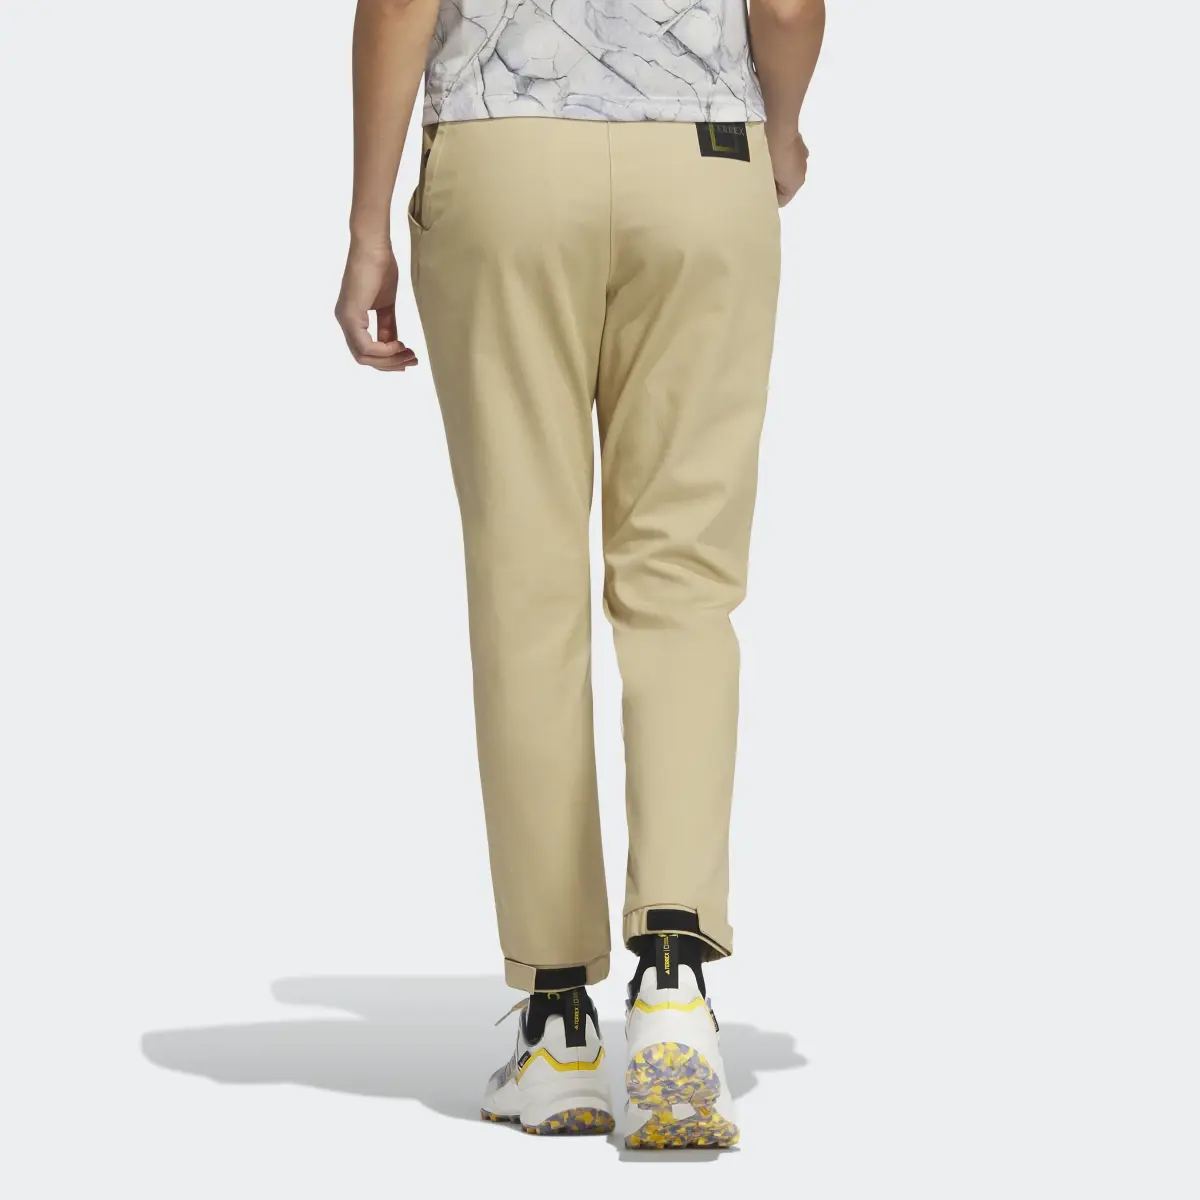 Adidas National Geographic Twill Trousers. 2